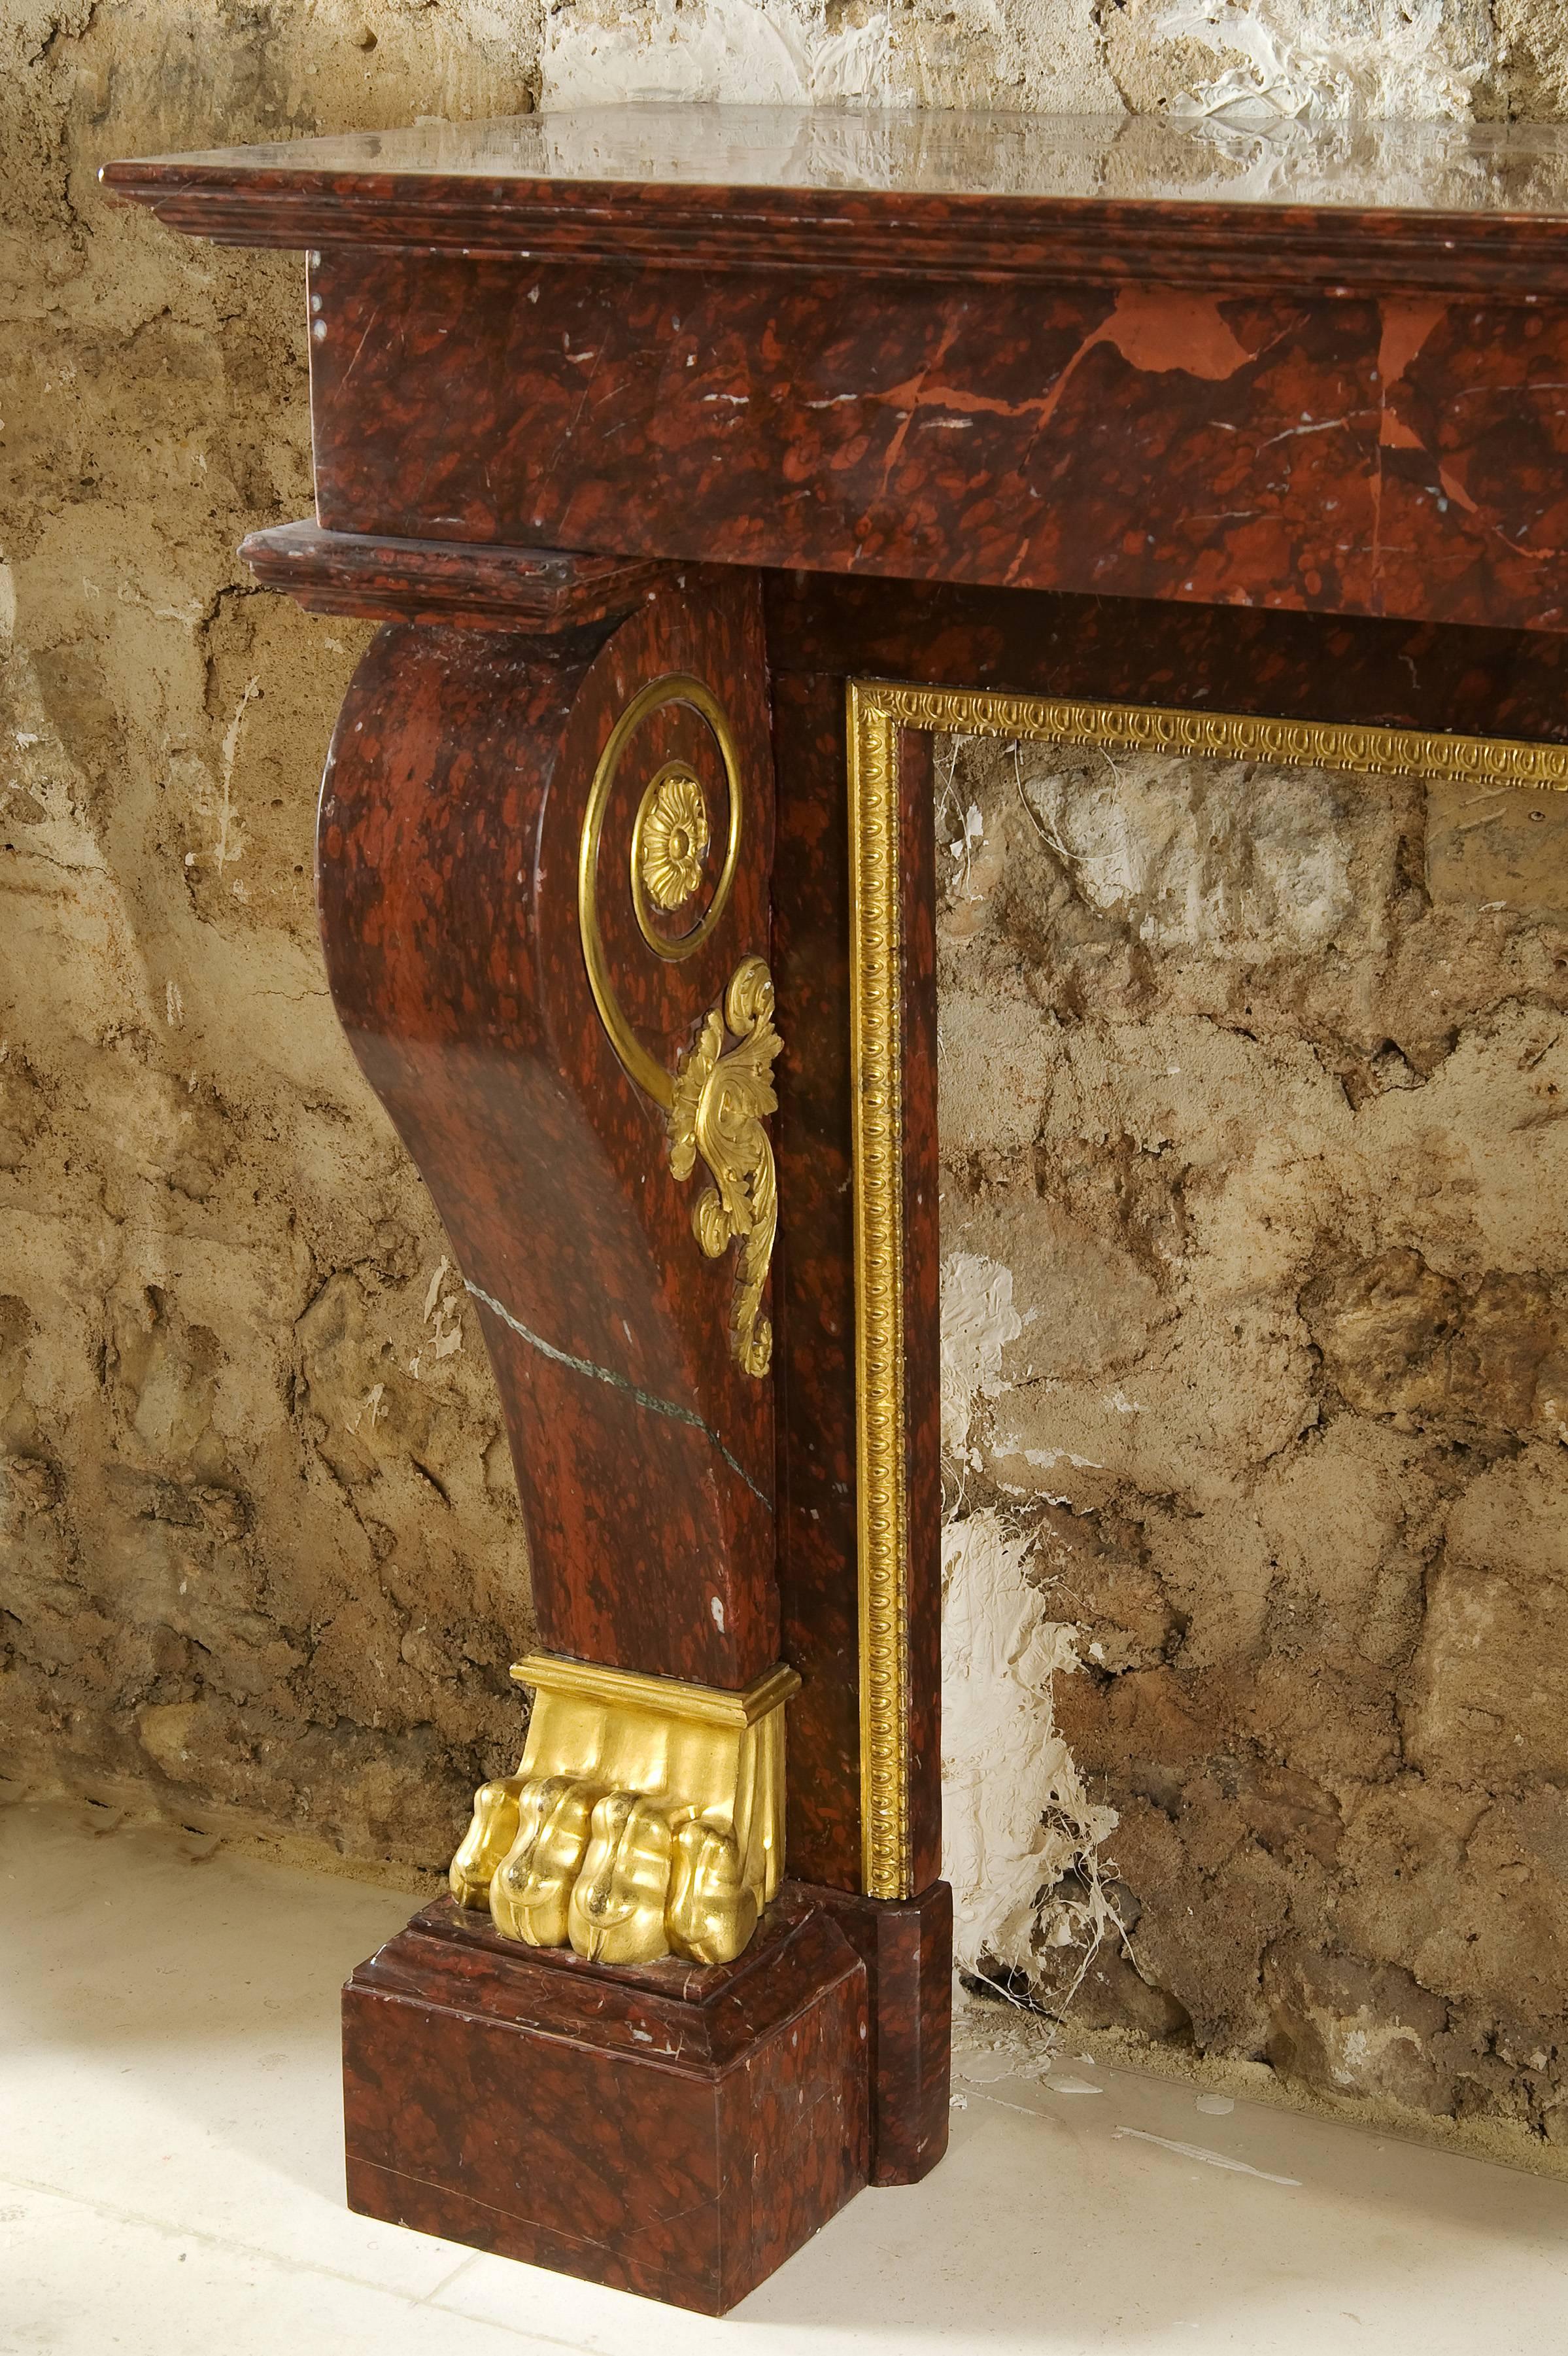 Beautiful fireplace in red marble with gilded bronze ornaments, this fireplace decoration is said "with Tiger paws."